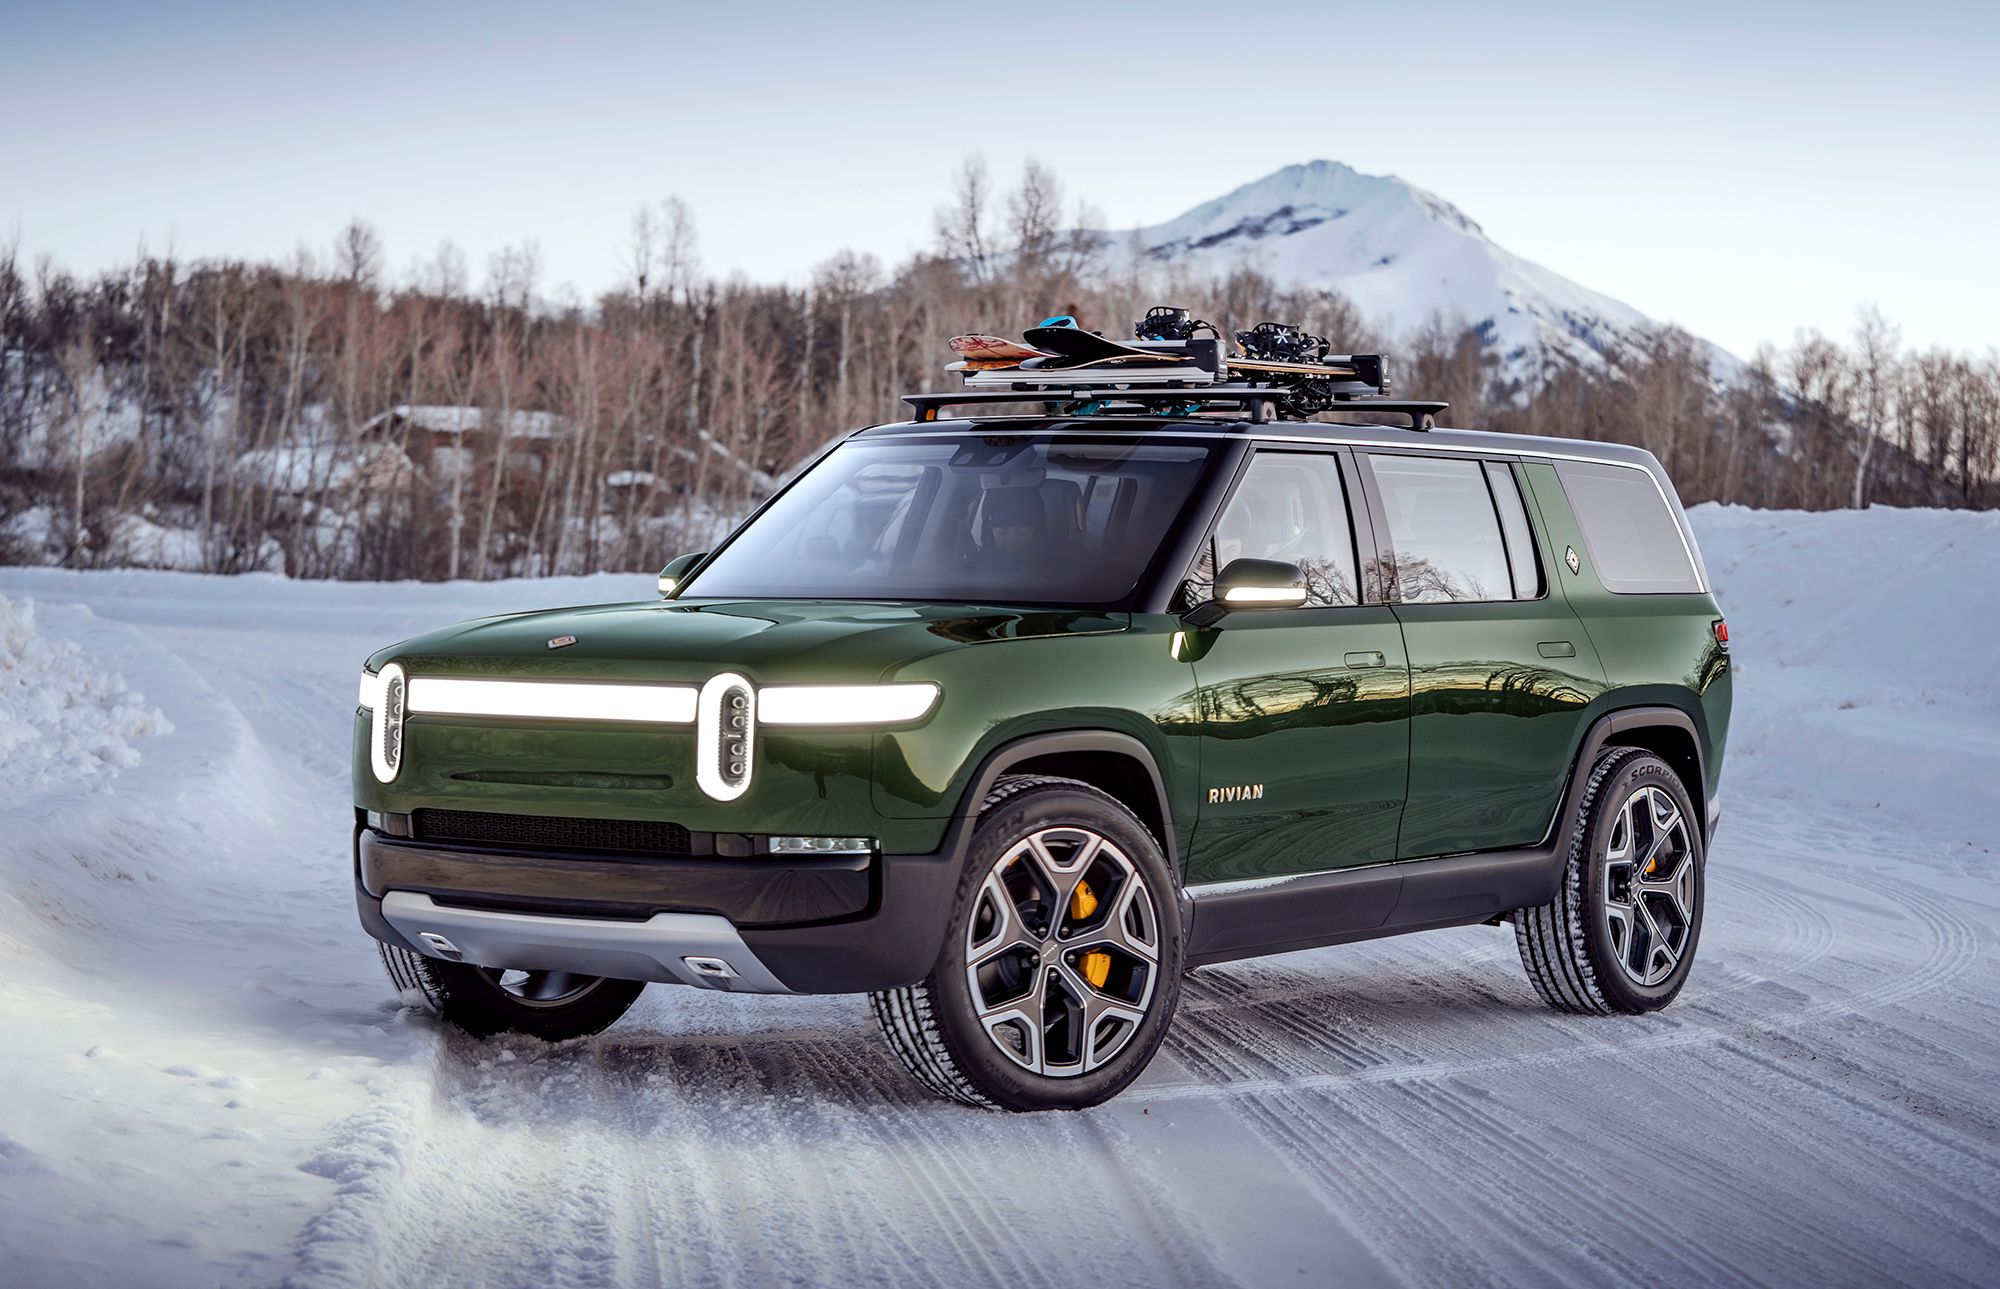 Make Sure You Know the Details of Rivian's Trade-In Process and Guarantee